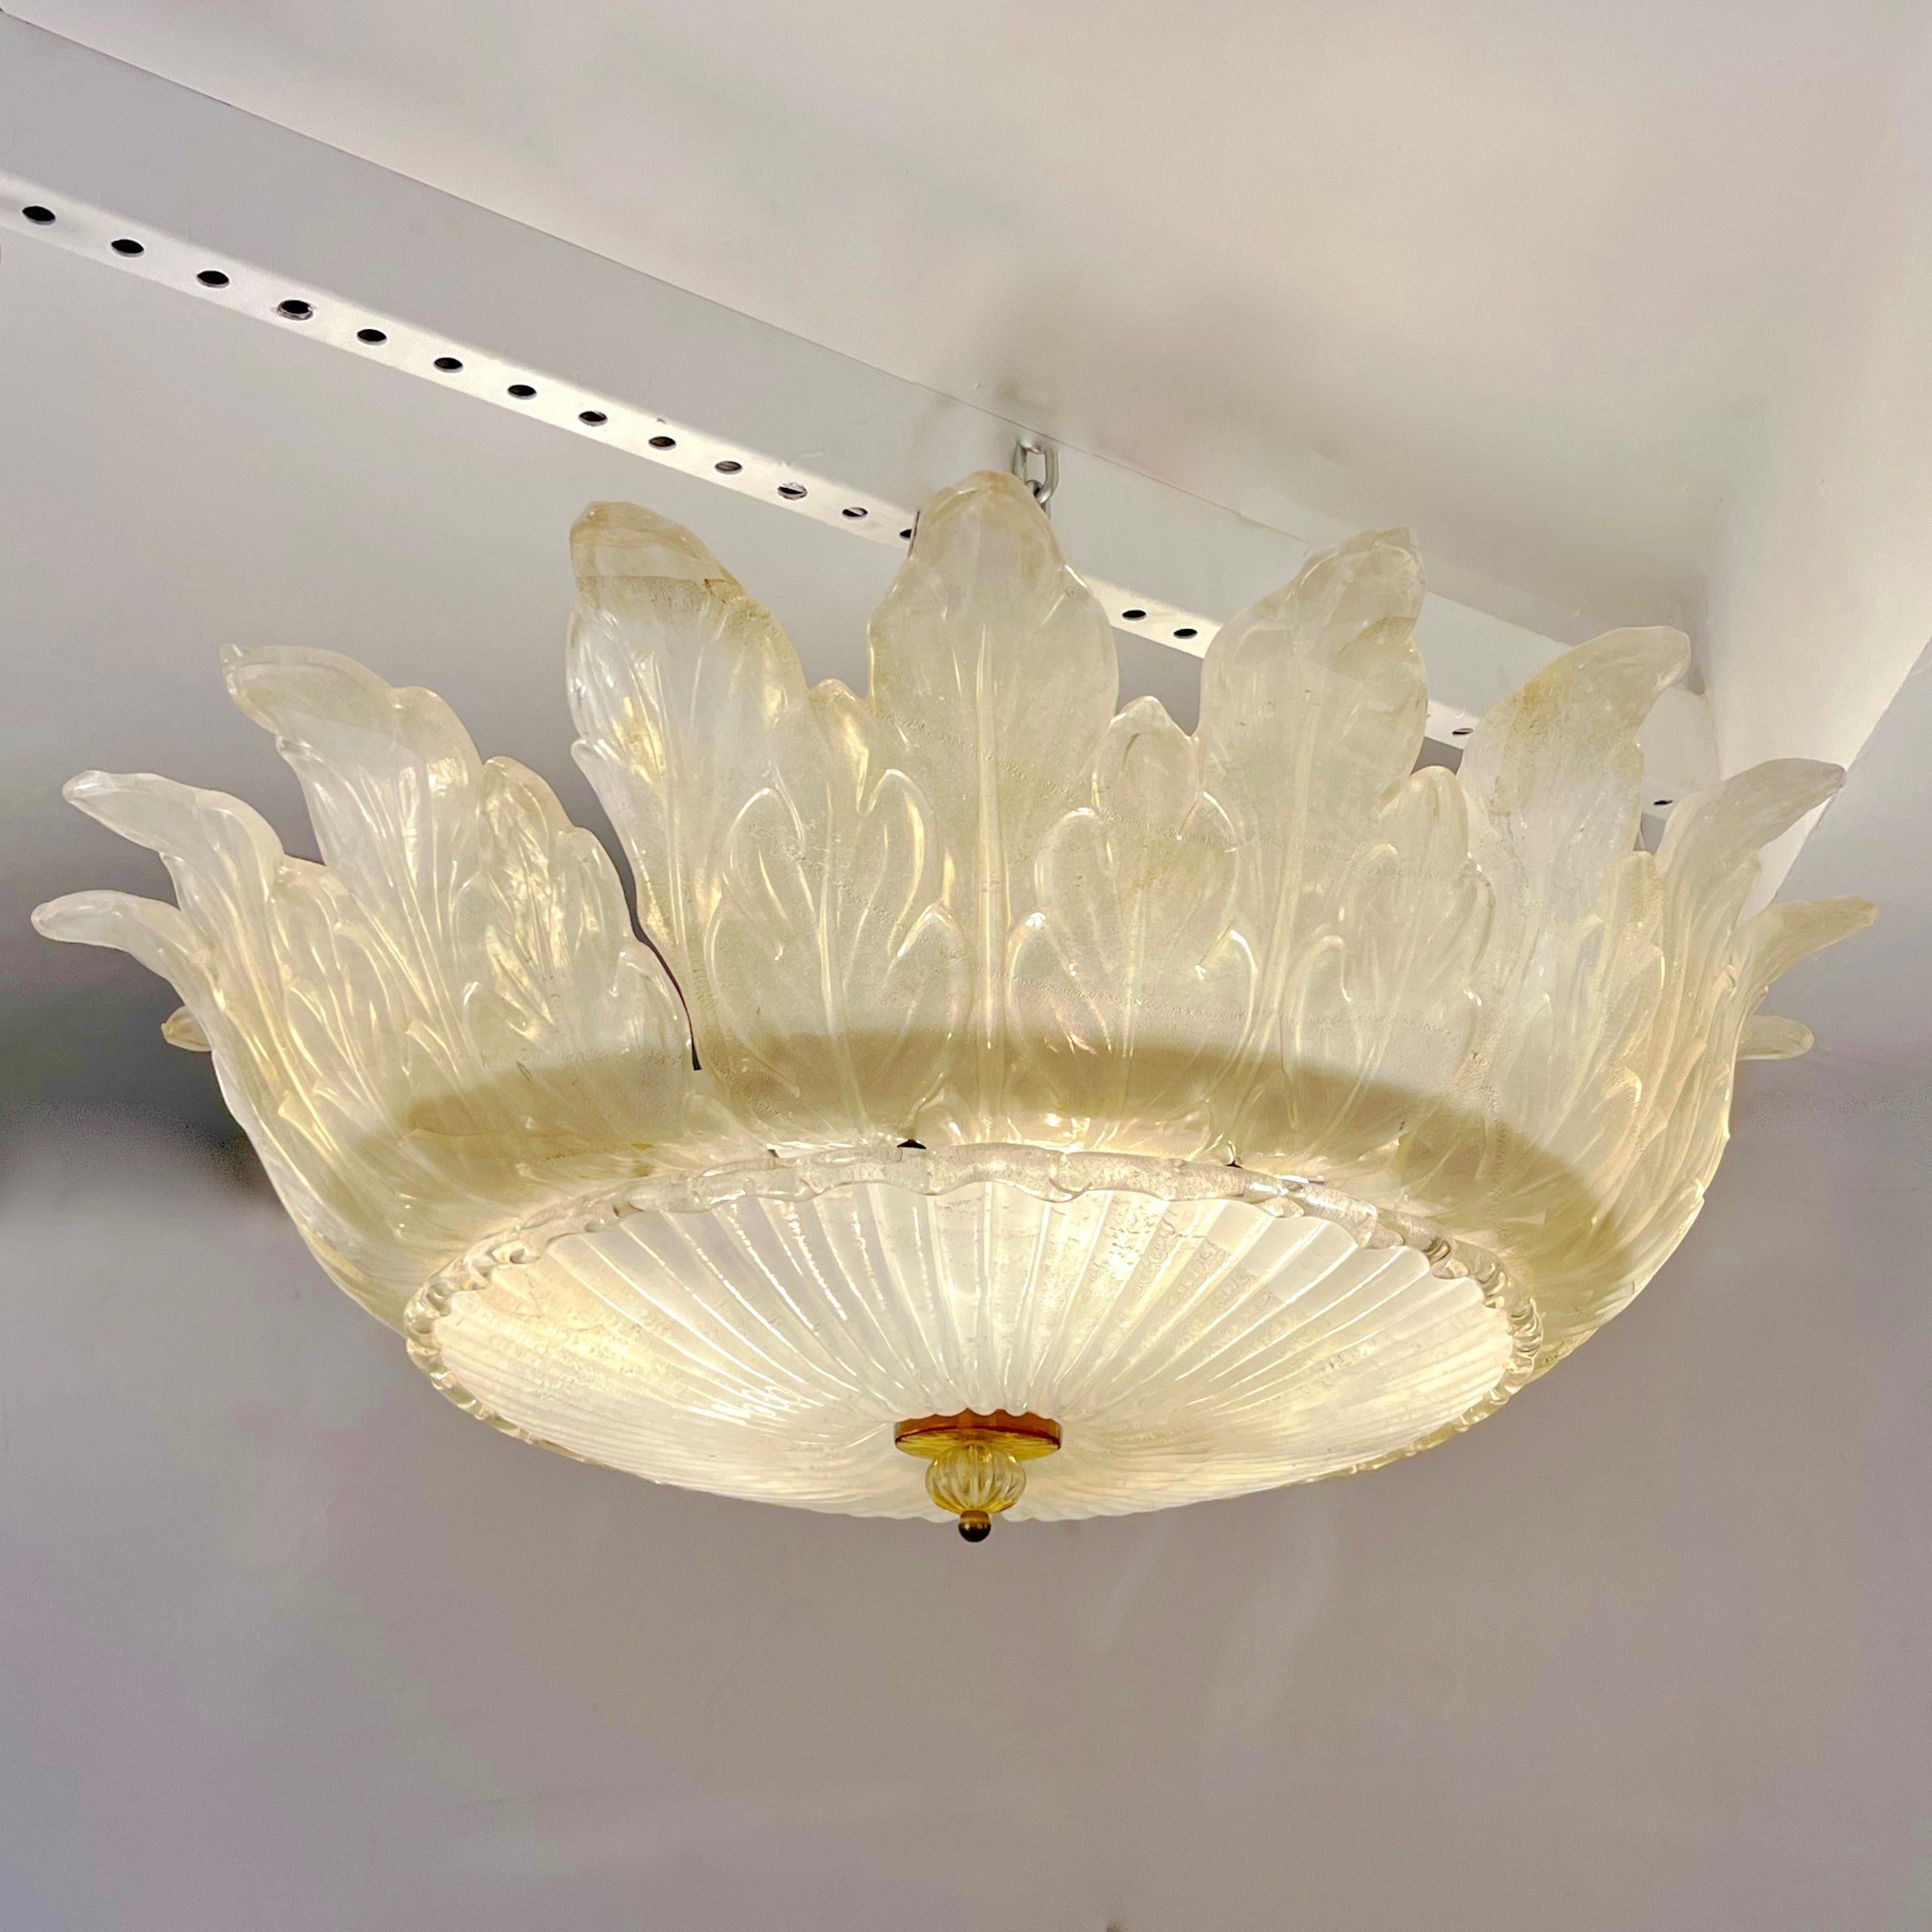 Vintage ivory transitional flush mount chandelier with highly decorative technique applied to the Murano glass, worked with pure gold and iridescent translucence that gives an exceptional pearl silk finish. The short drop makes this also ideal as a